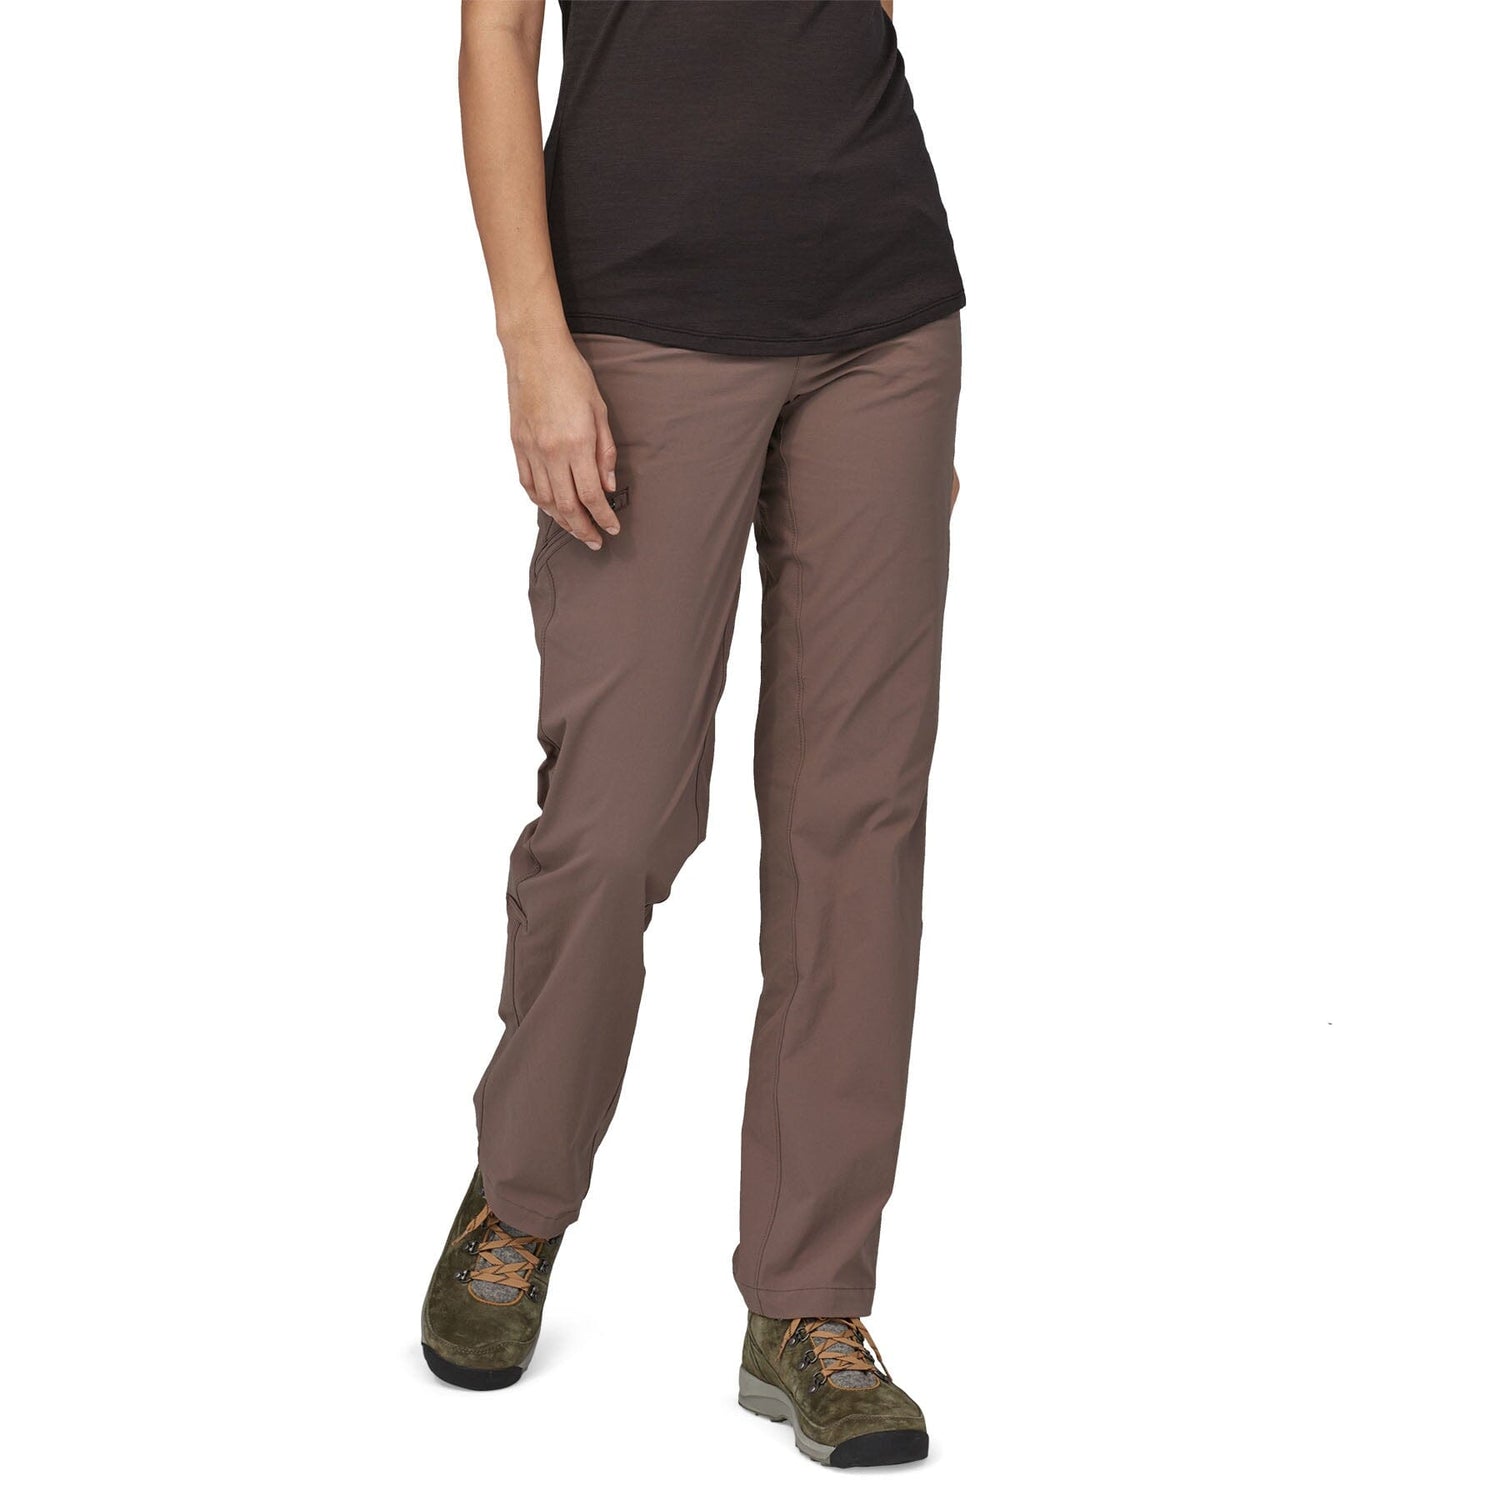 Patagonia - W's Quandary Pants - Recycled Nylon - Weekendbee - sustainable sportswear